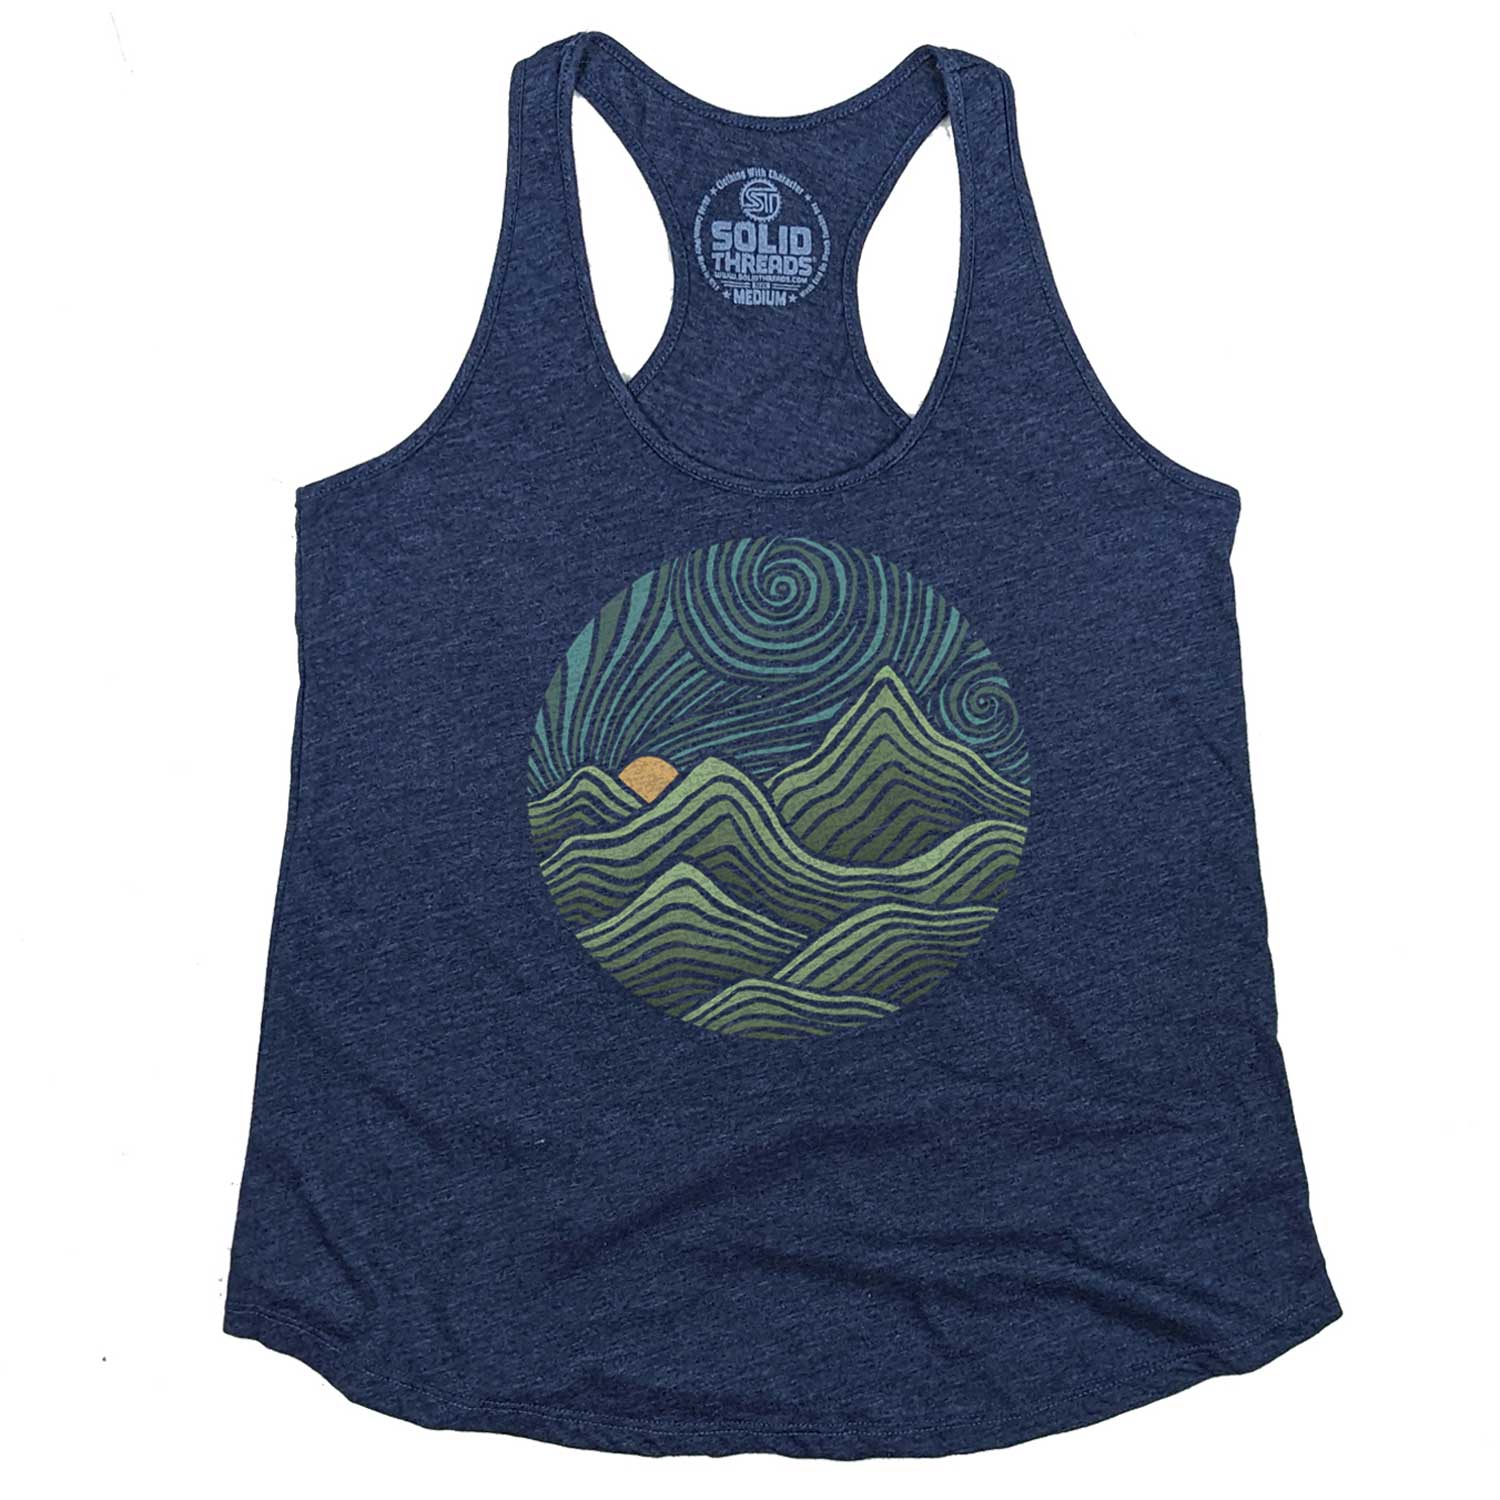 Women's Swirly Mountains Vintage Graphic Tank Top | Retro Nature T-shirt | Solid Threads